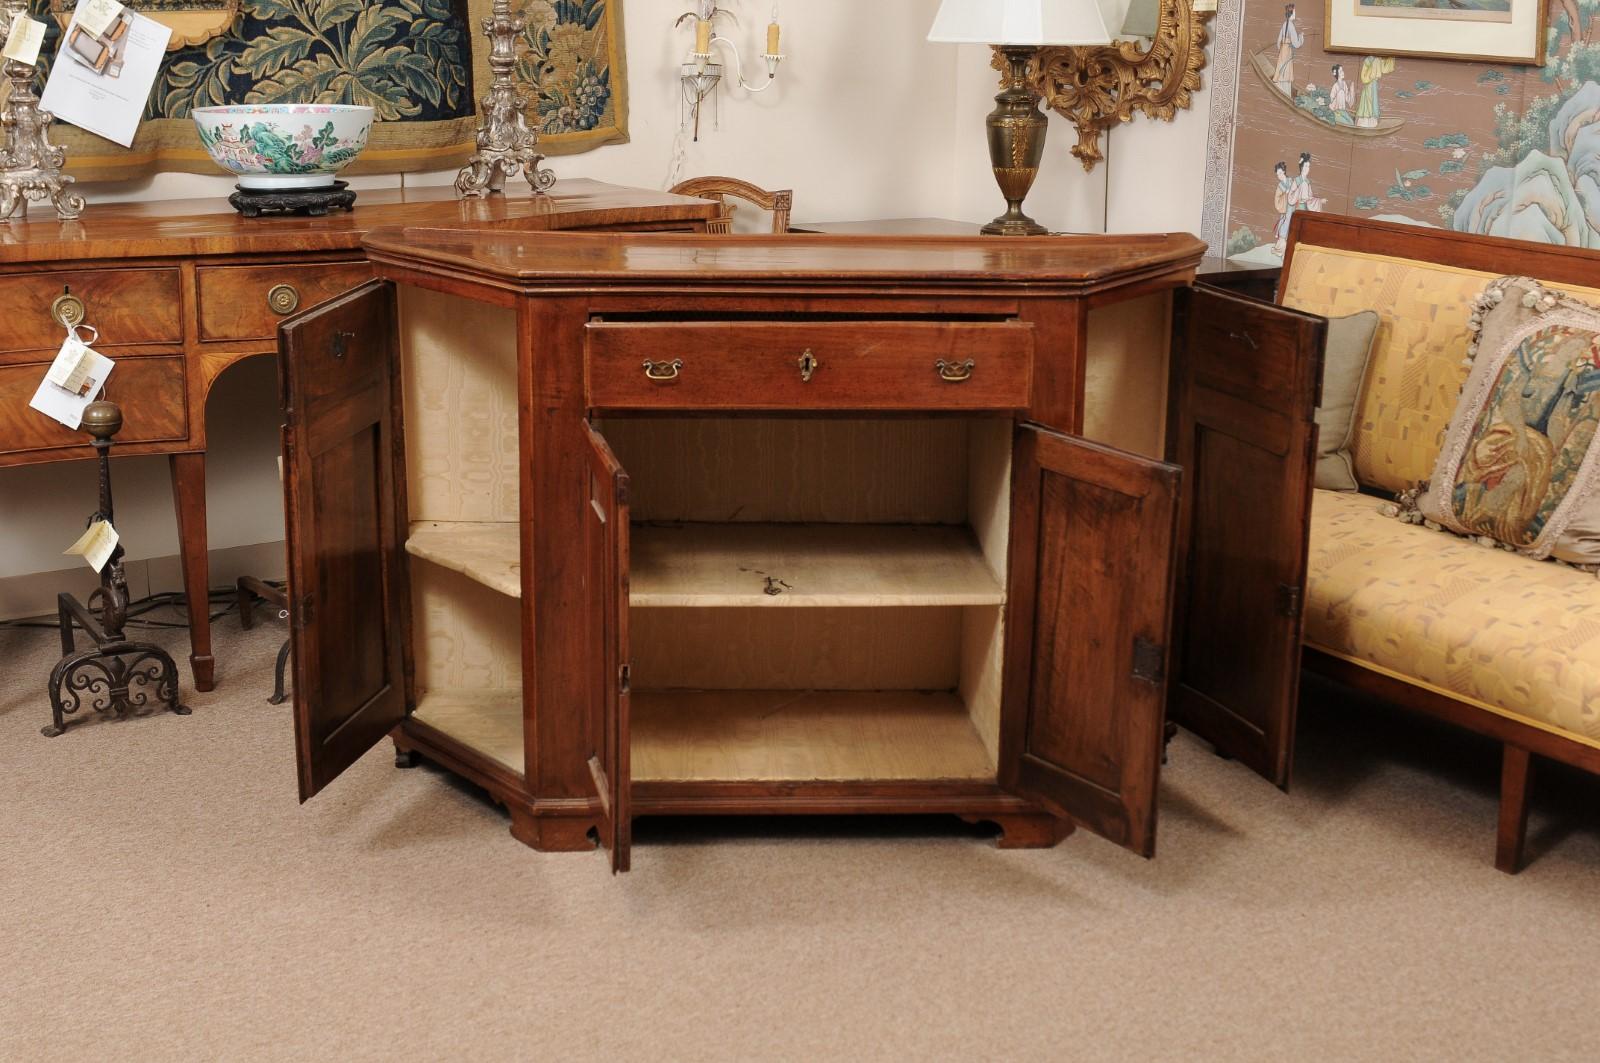 Early 19th century Italian walnut credenza with canted sides, 3 drawers with brass hardware and 4 cabinets below with raised paneling ending in carved bracket feet.